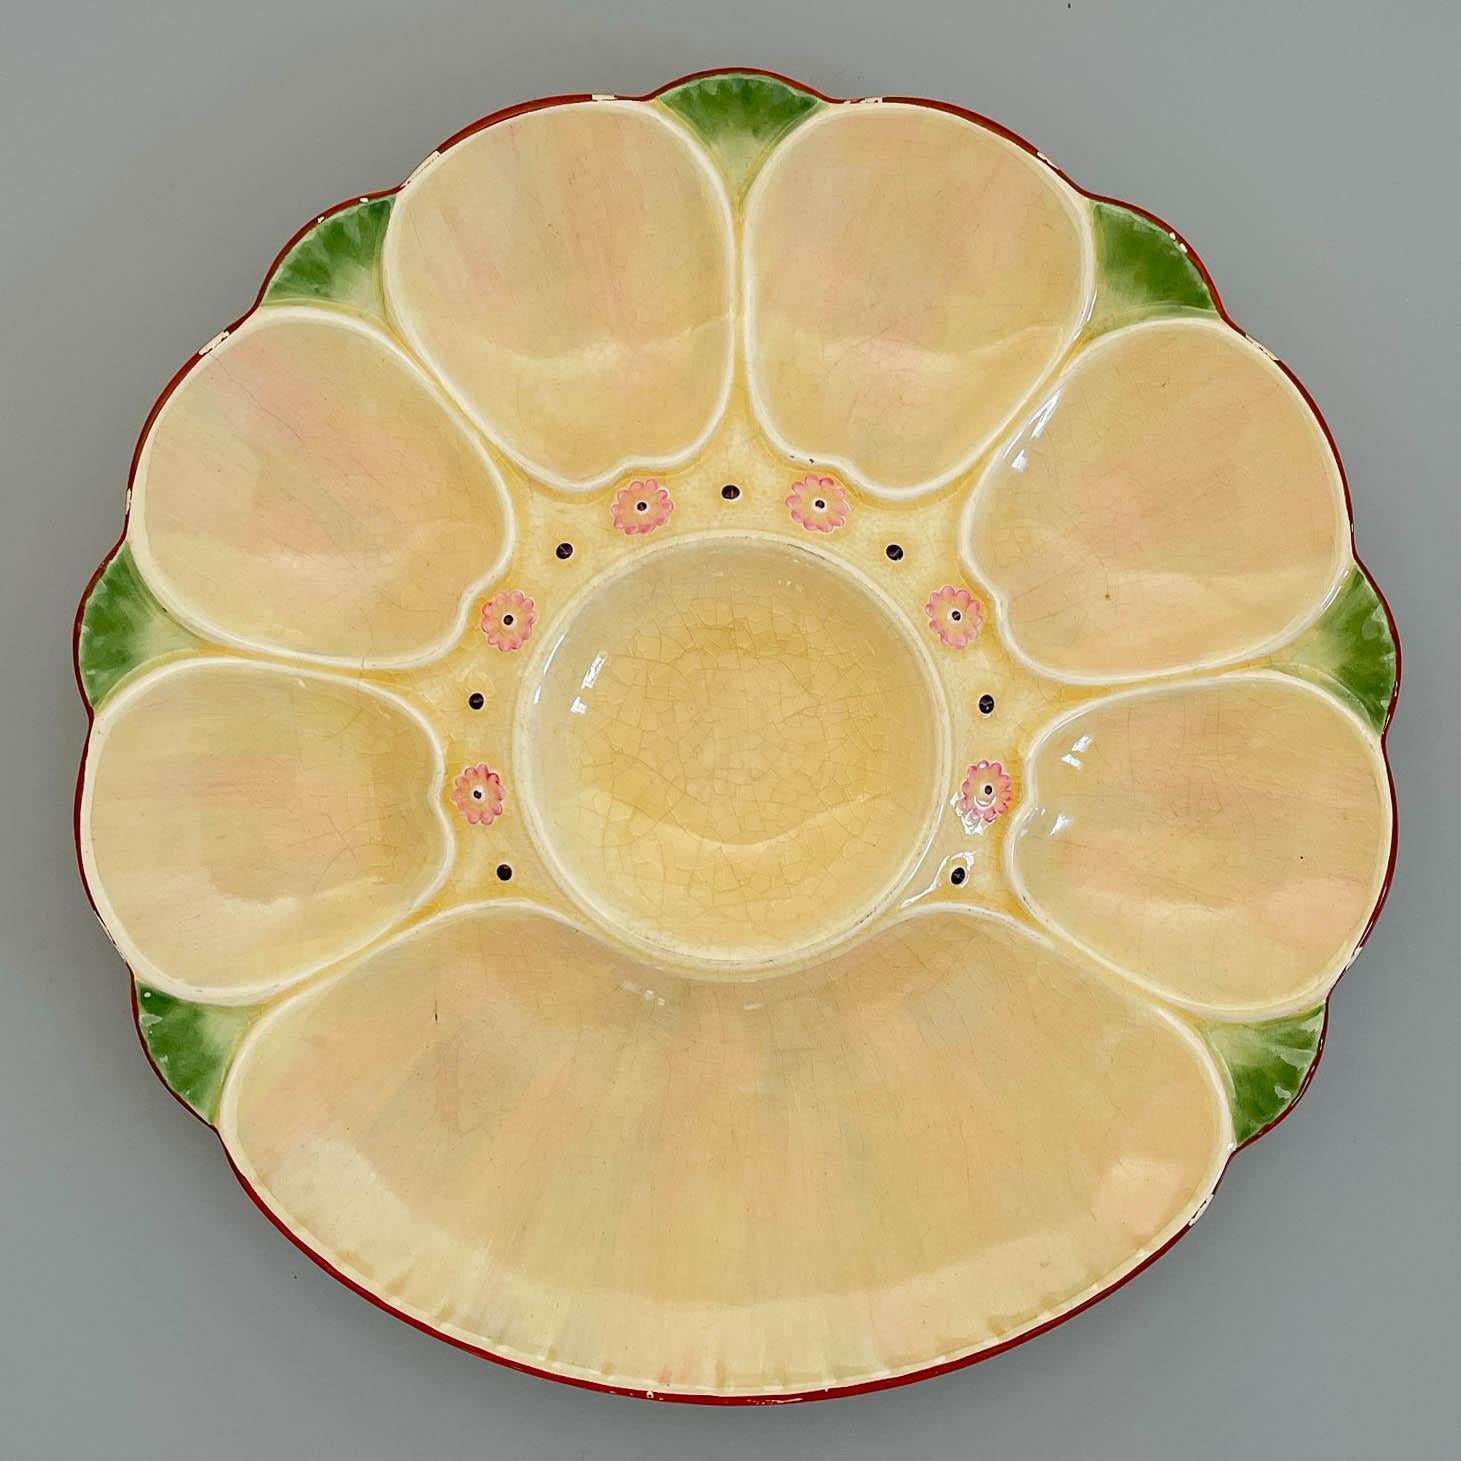 Late Victorian 19th Century English Minton Majolica Oyster Plates Pair For Sale